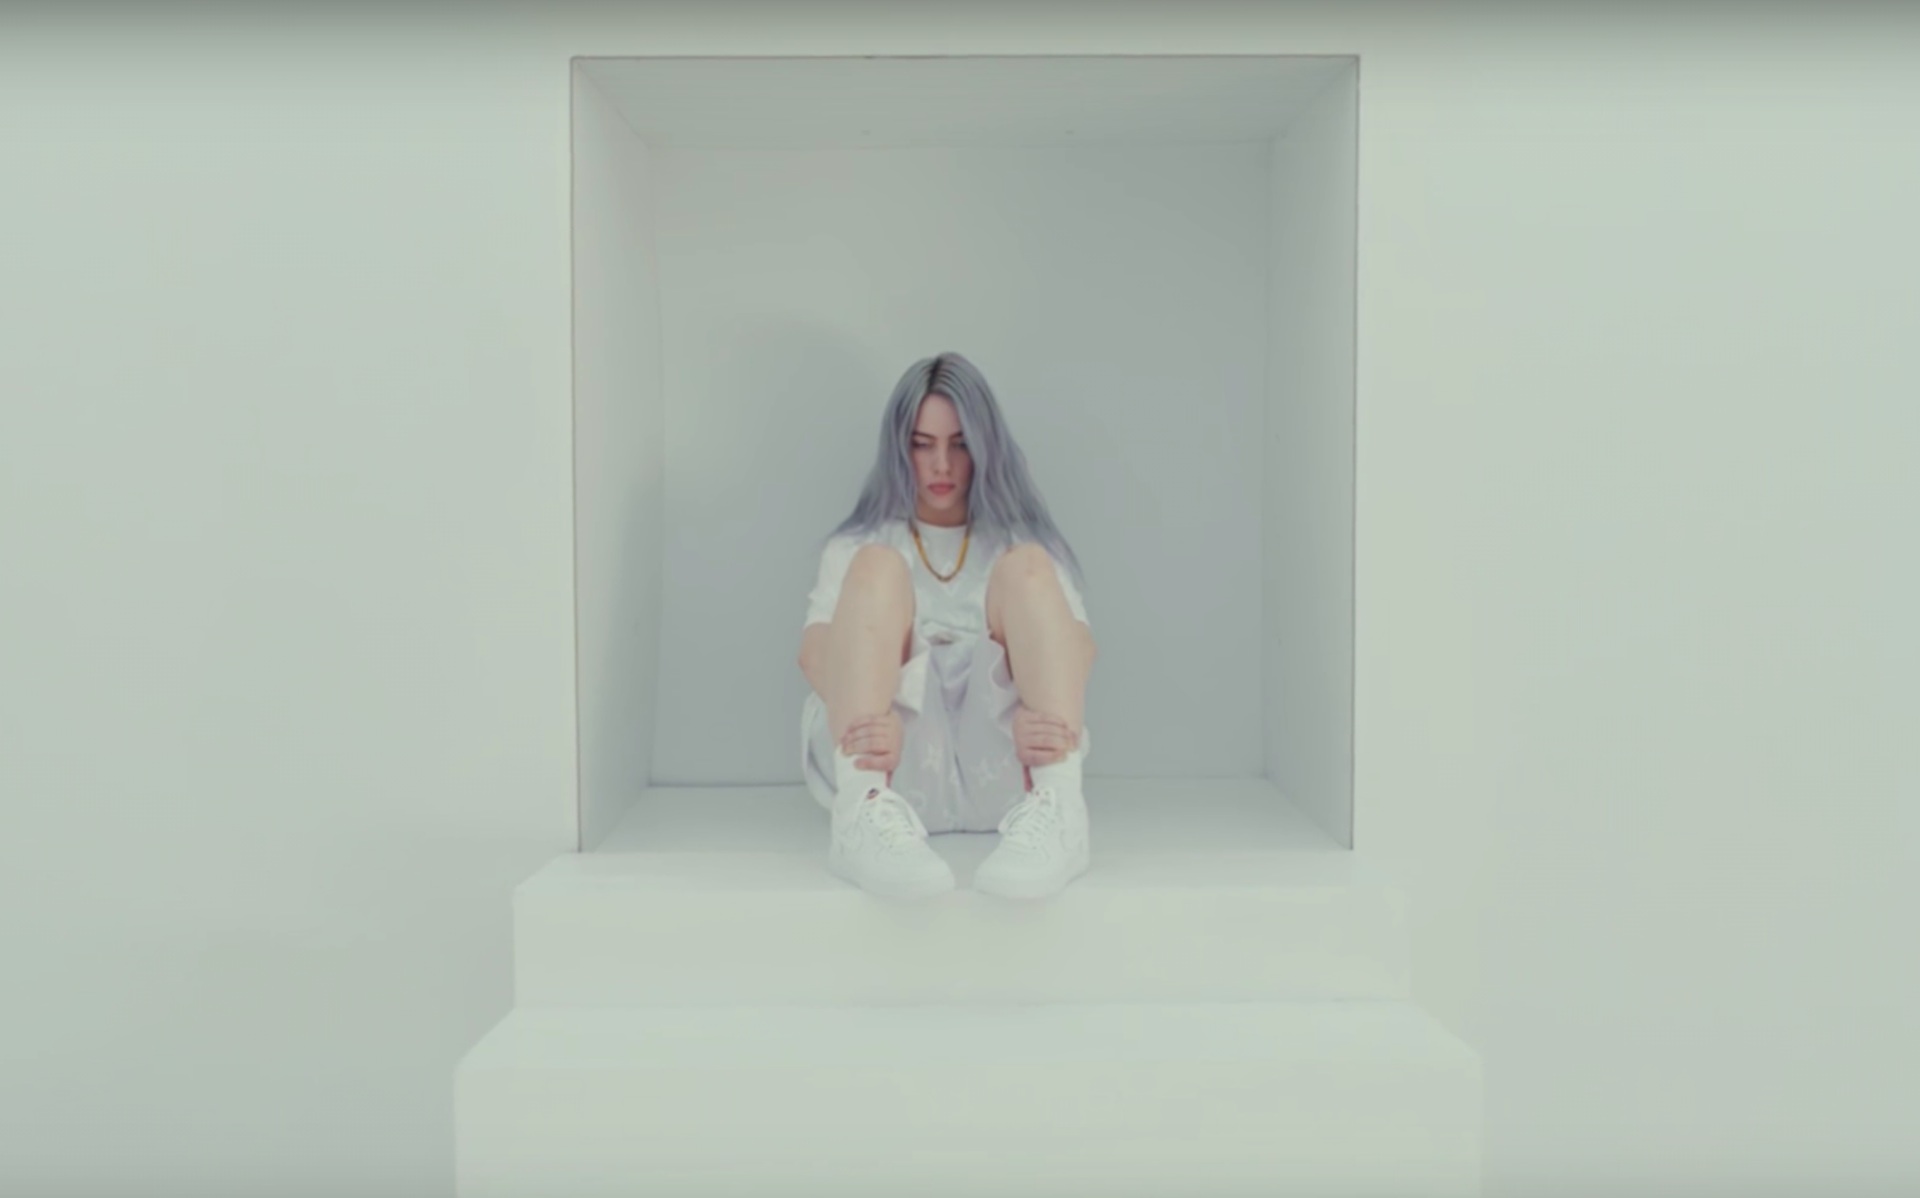 Billie Eilish Attempts To Escape The Room In New Video For Hostage